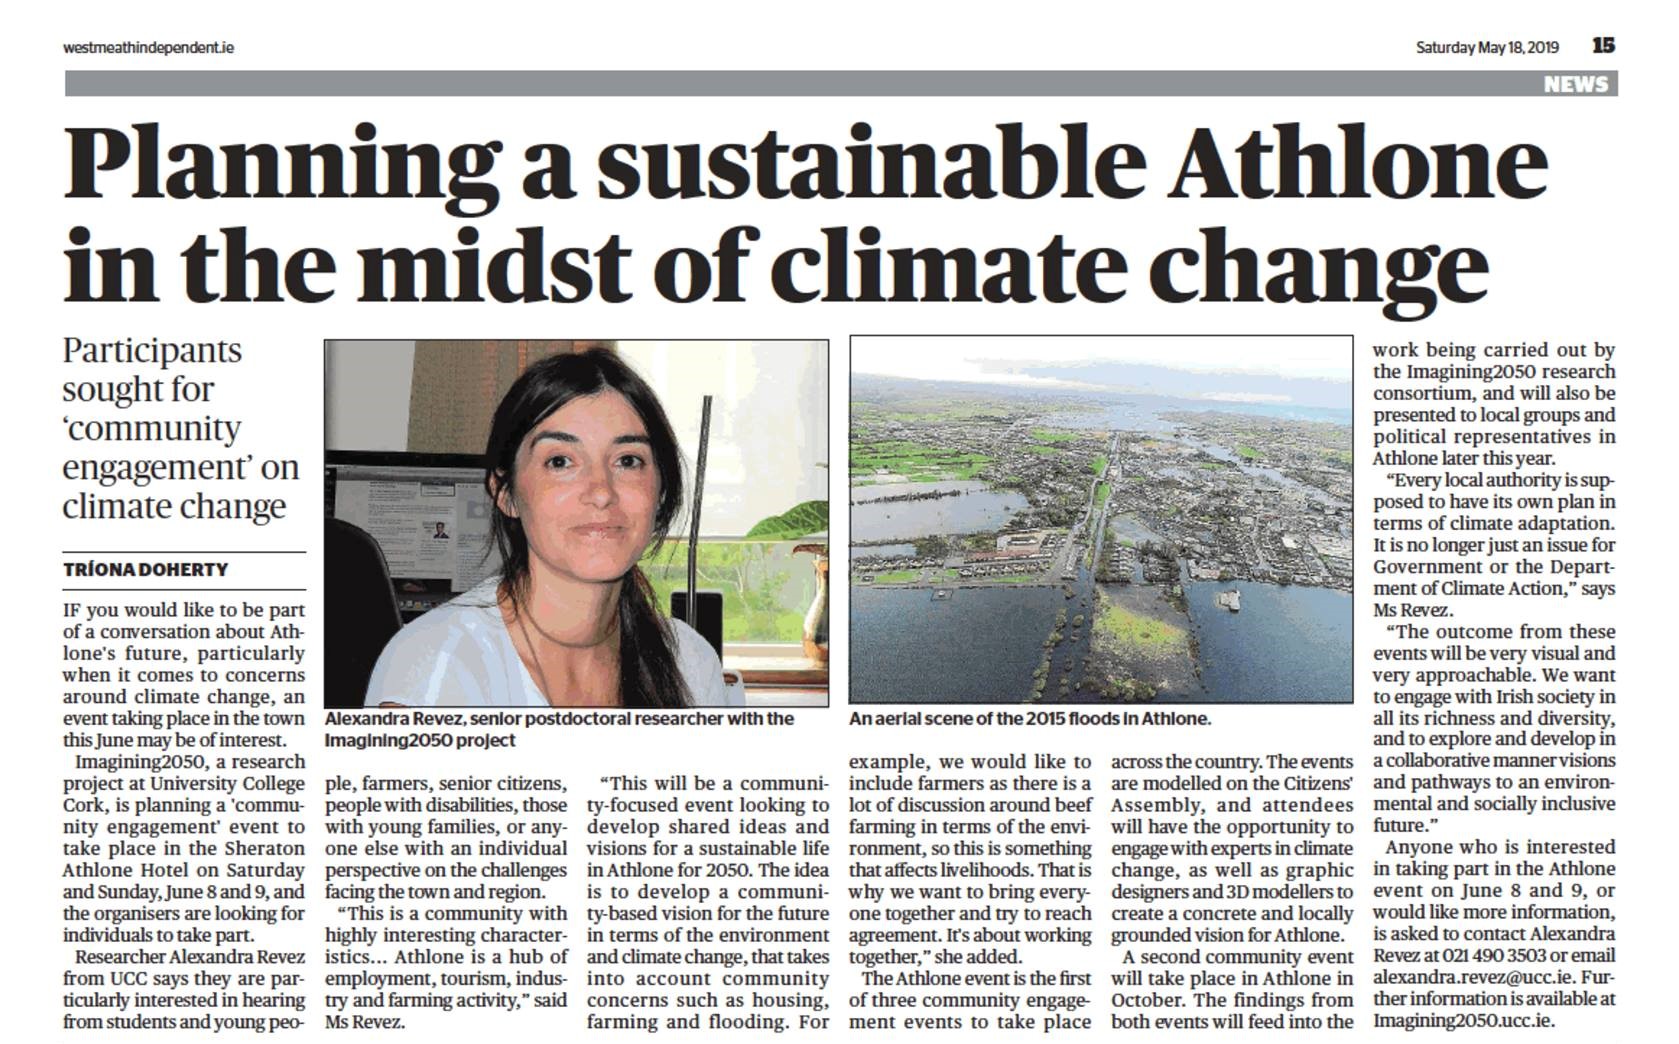 Planning a Sustainable Athlone in the midst of Climate Change